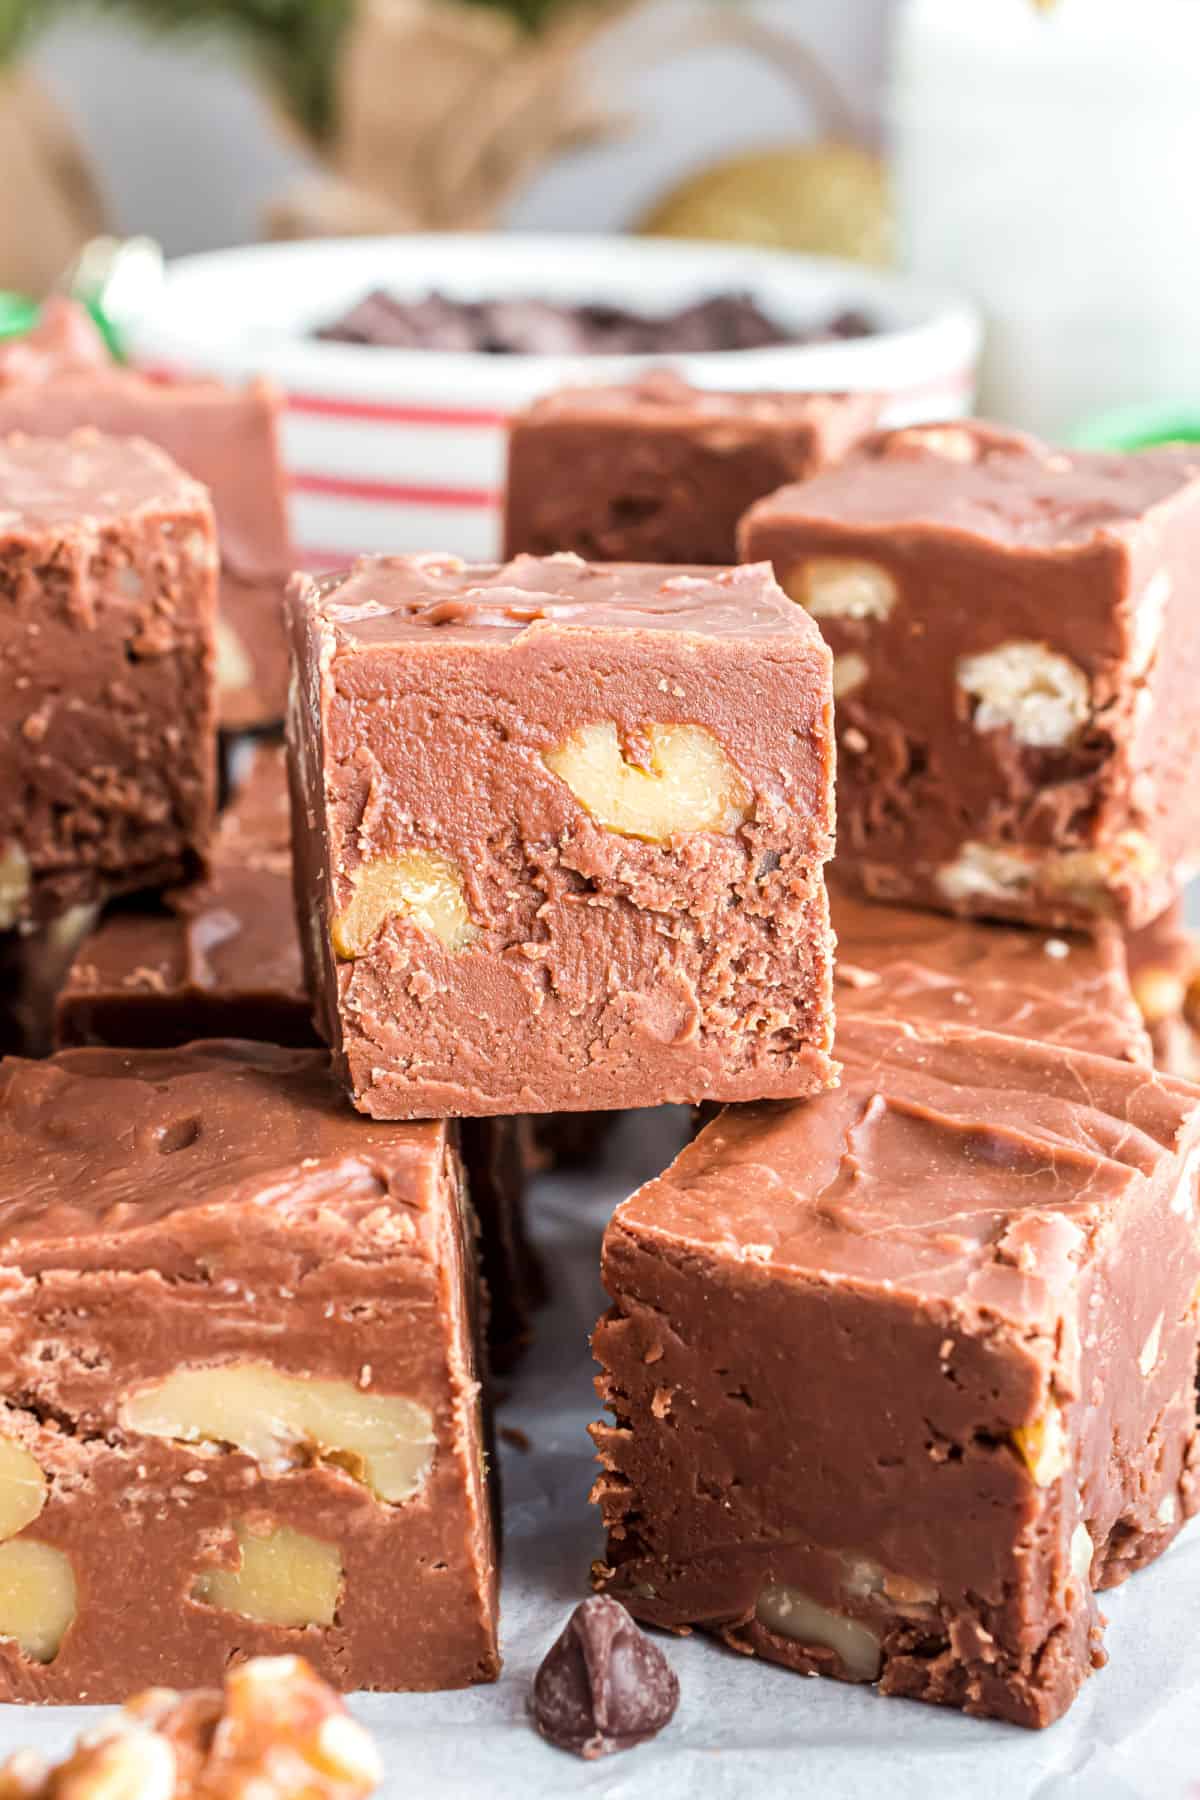 Chocolate fudge with walnuts stacked to serve.